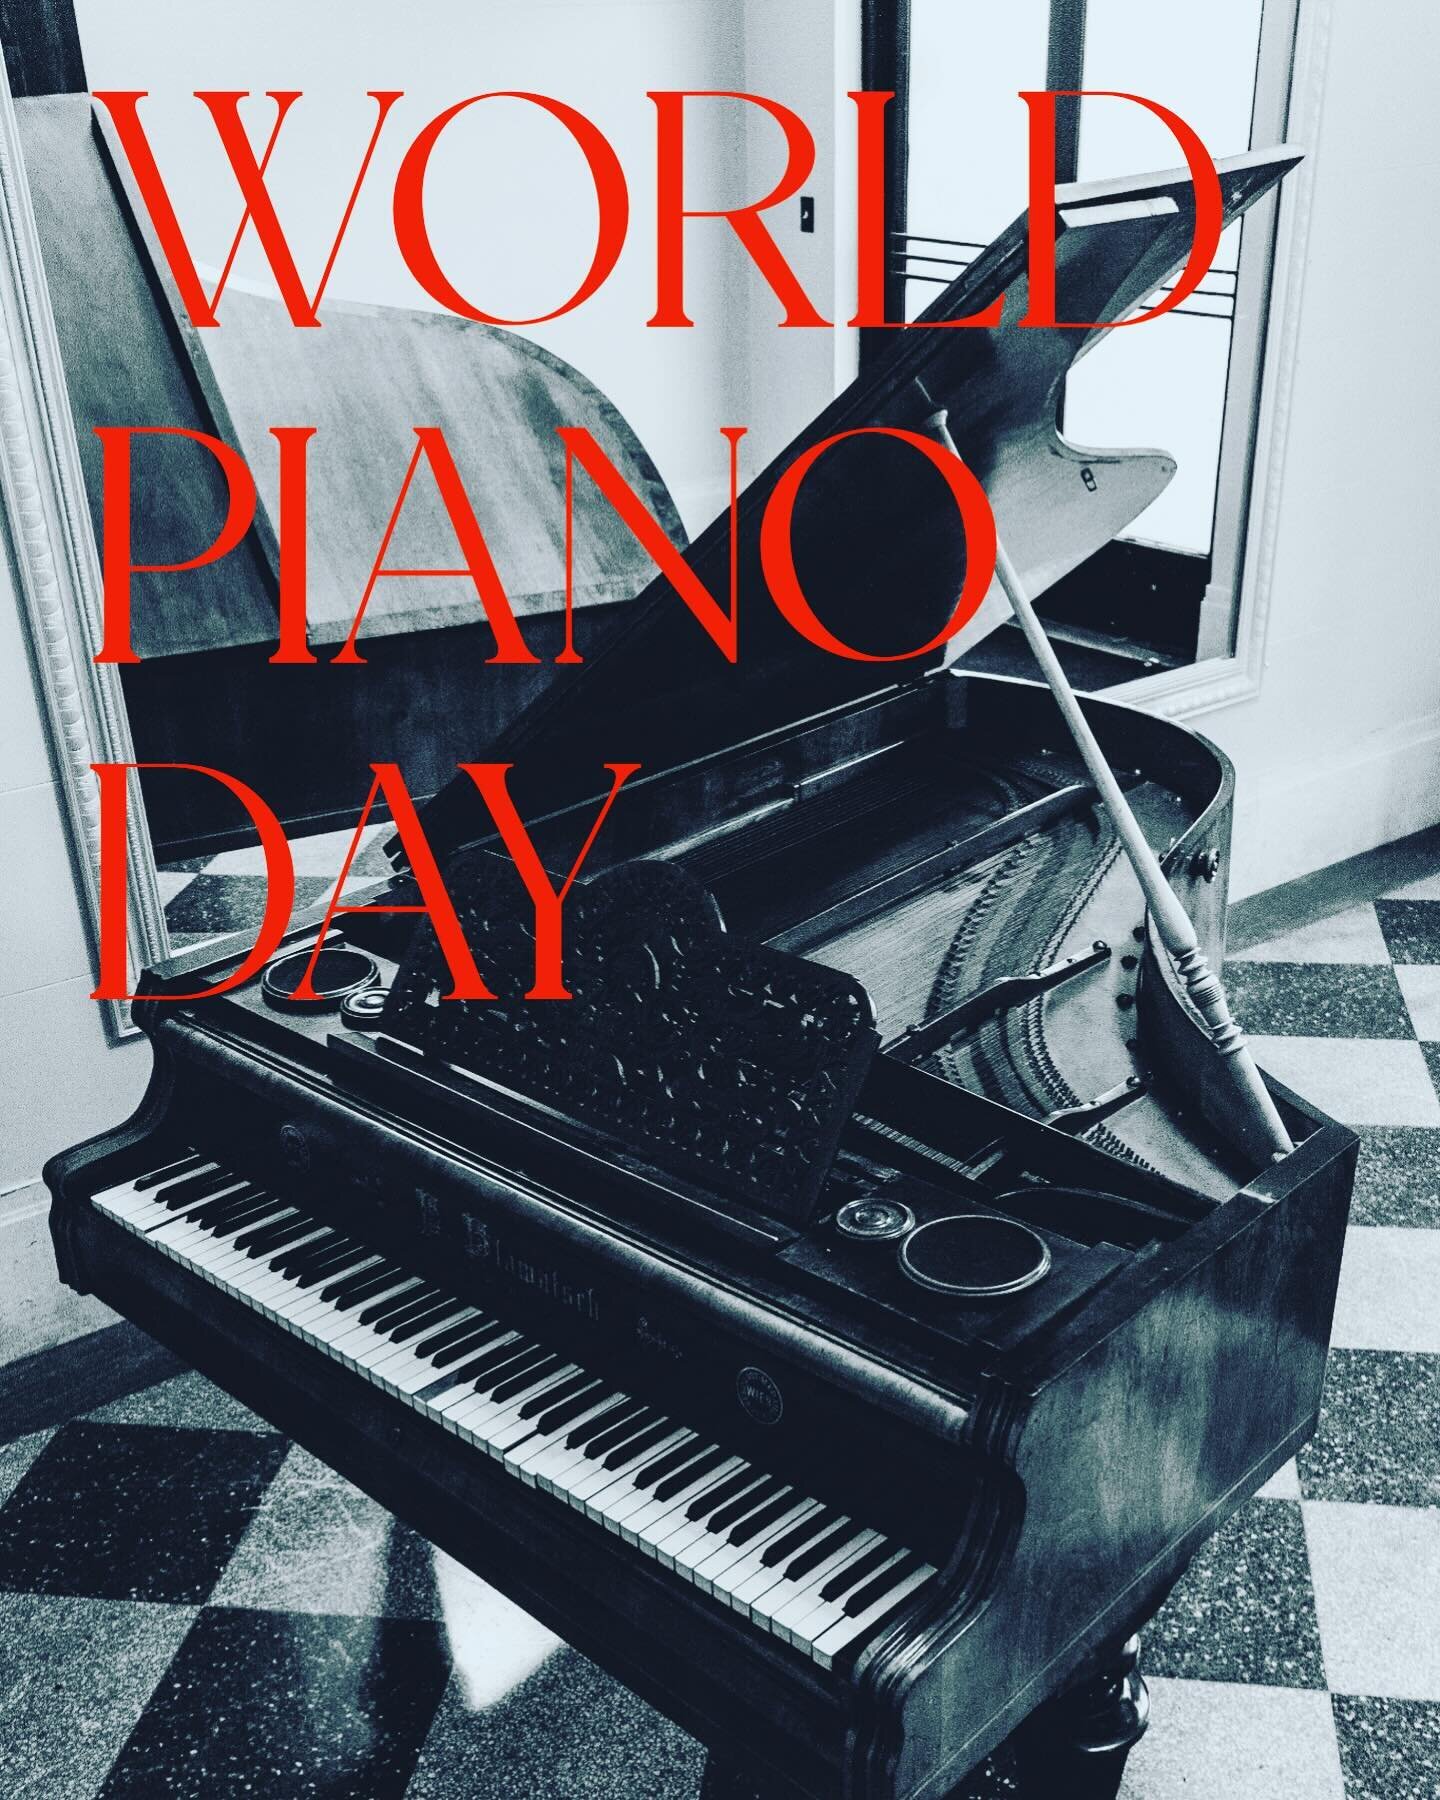 Did you know?
-an estimated 18 million Americans play the piano 
-ideally, new pianos are tuned 4 times a year
-pianos have 88 keys..36 black, 52 white
-pianos are classified as both a string and percussion instrument
-pianos have the widest range of